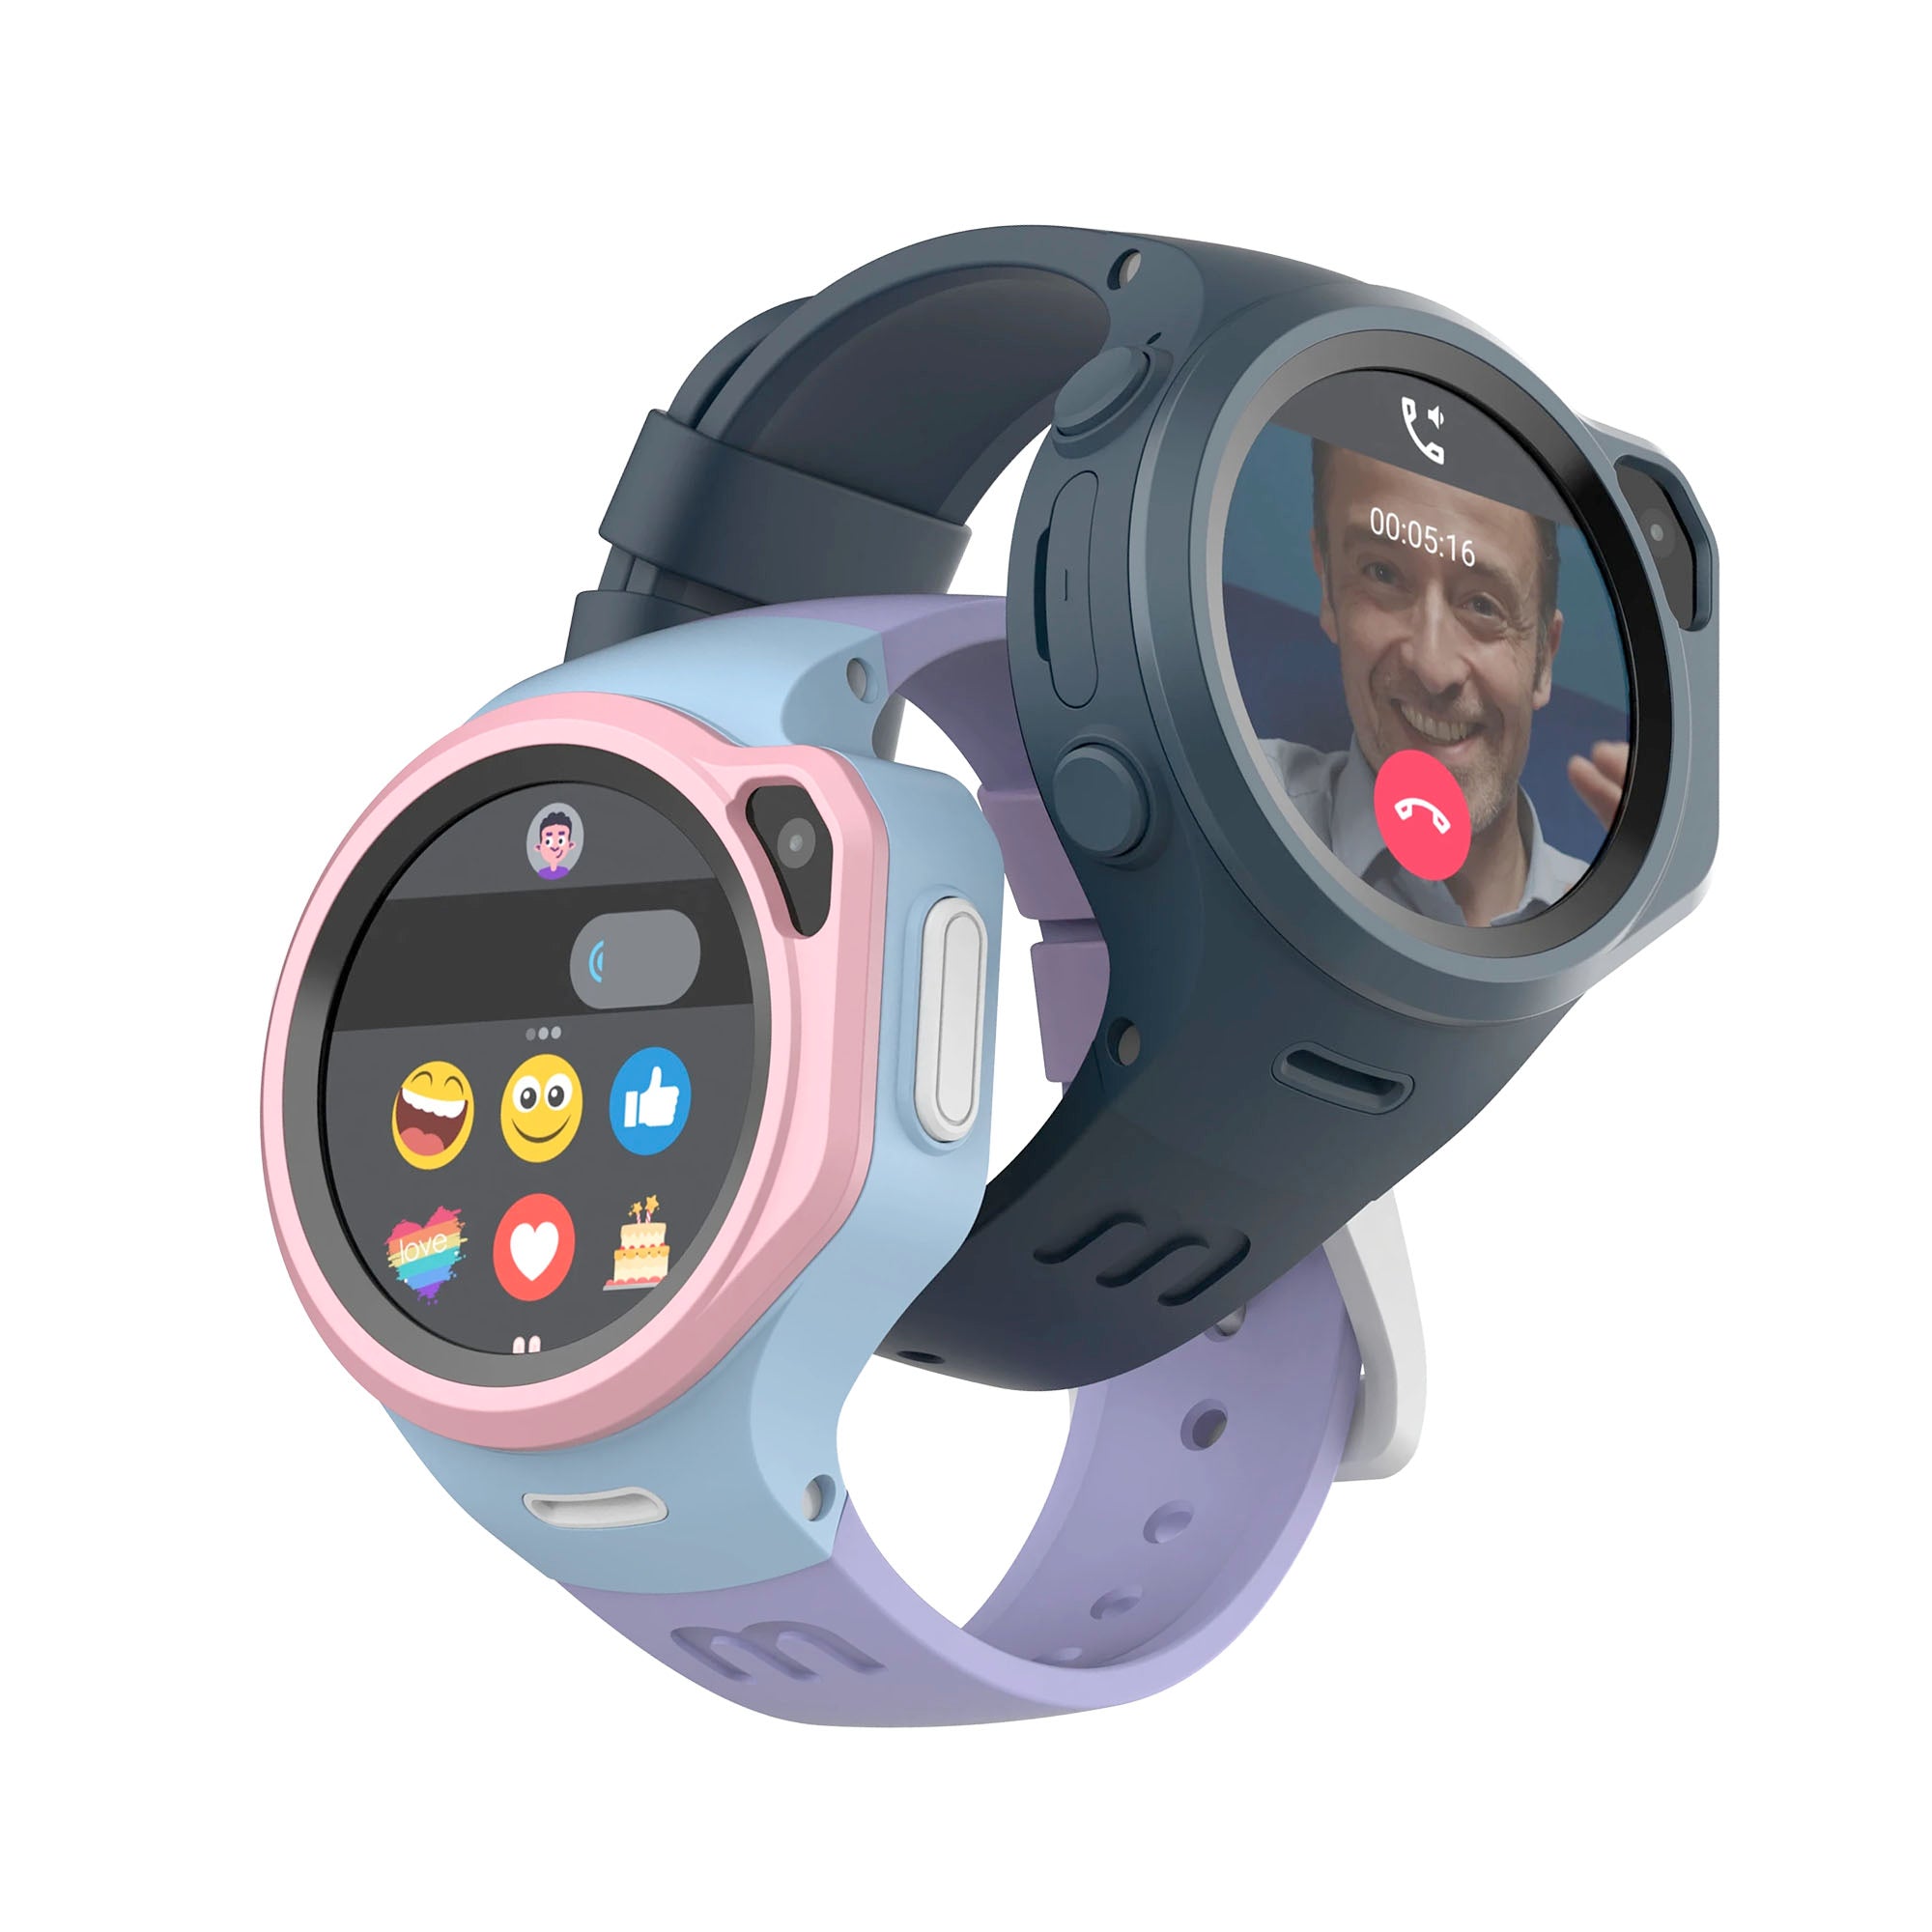 myFirst Fone R1s - Smart Watch for Kids 